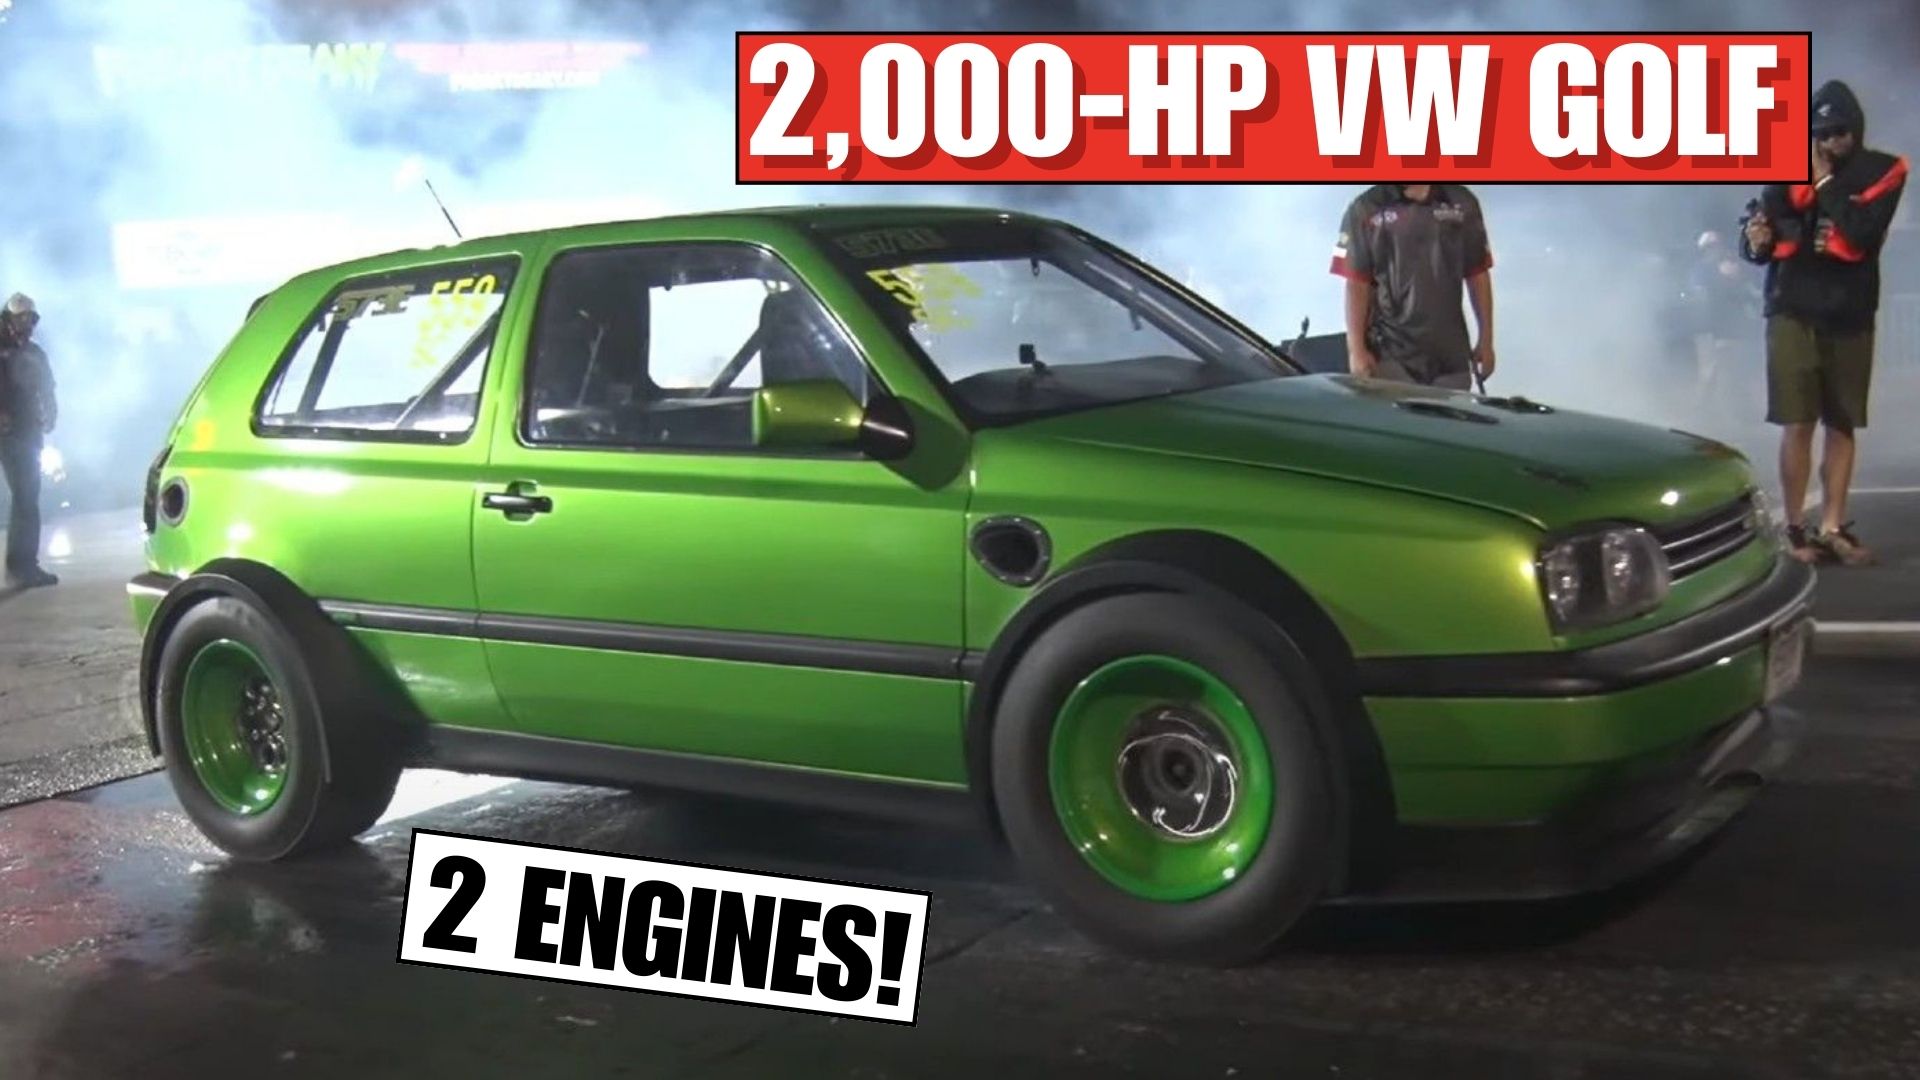 The Story Behind The Crazy Twin Engine MK3 Volkswagen Golf With